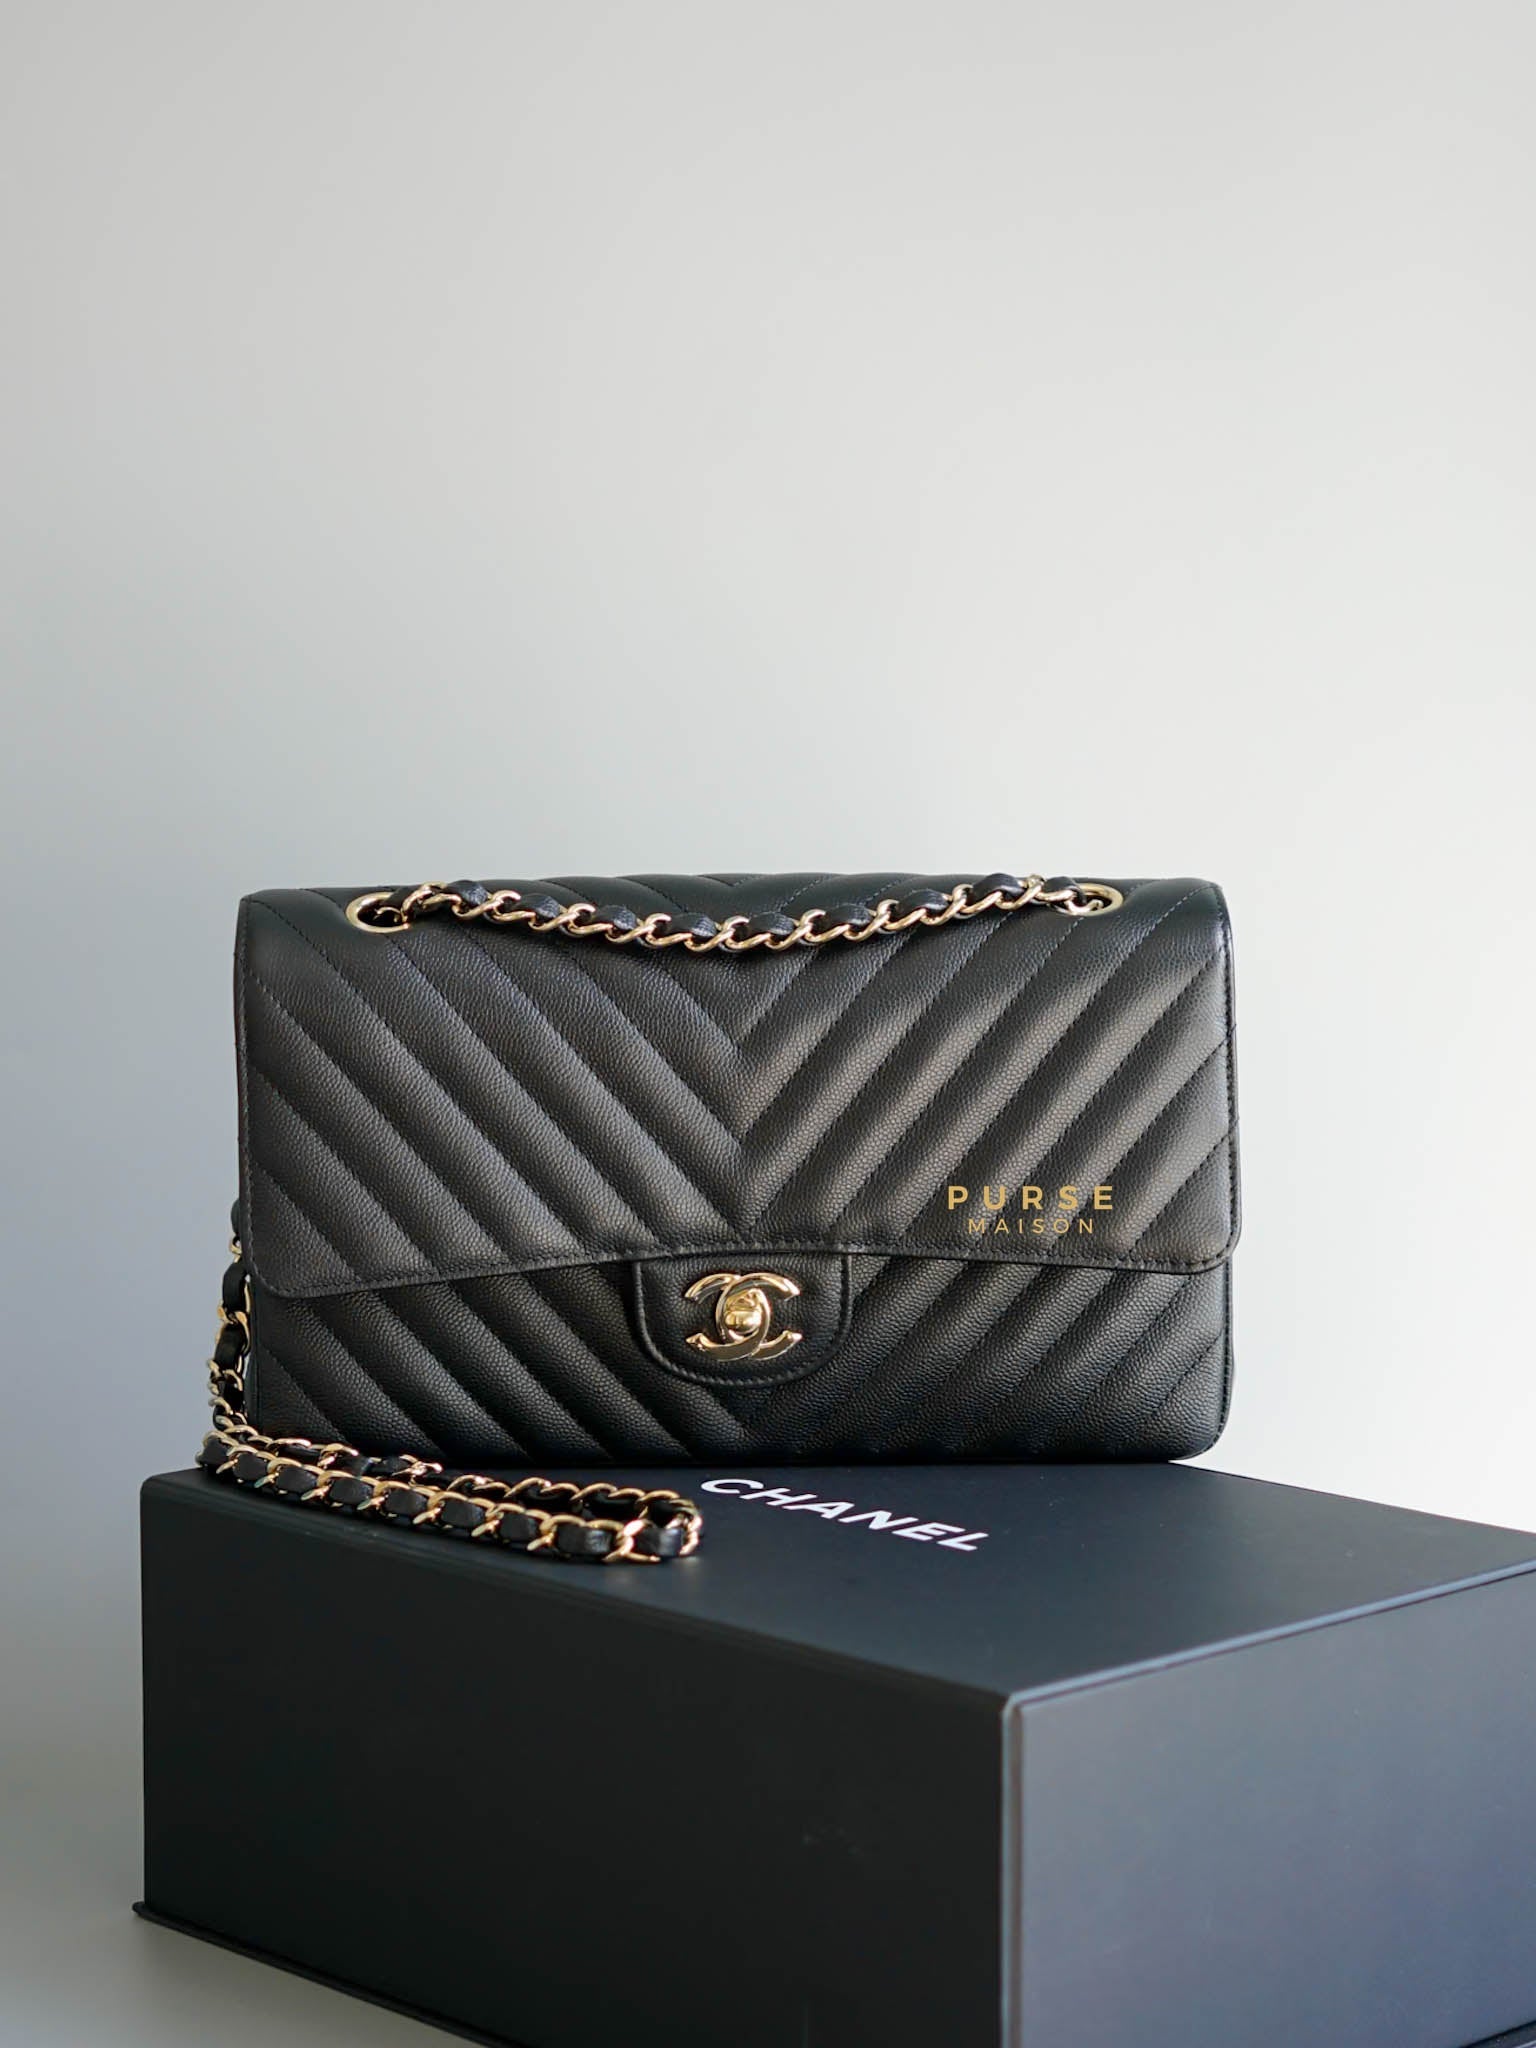 Chanel Classic Double Flap Medium in Black Chevron Caviar Leather and Light Gold Hardware (Series 31) | Purse Maison Luxury Bags Shop